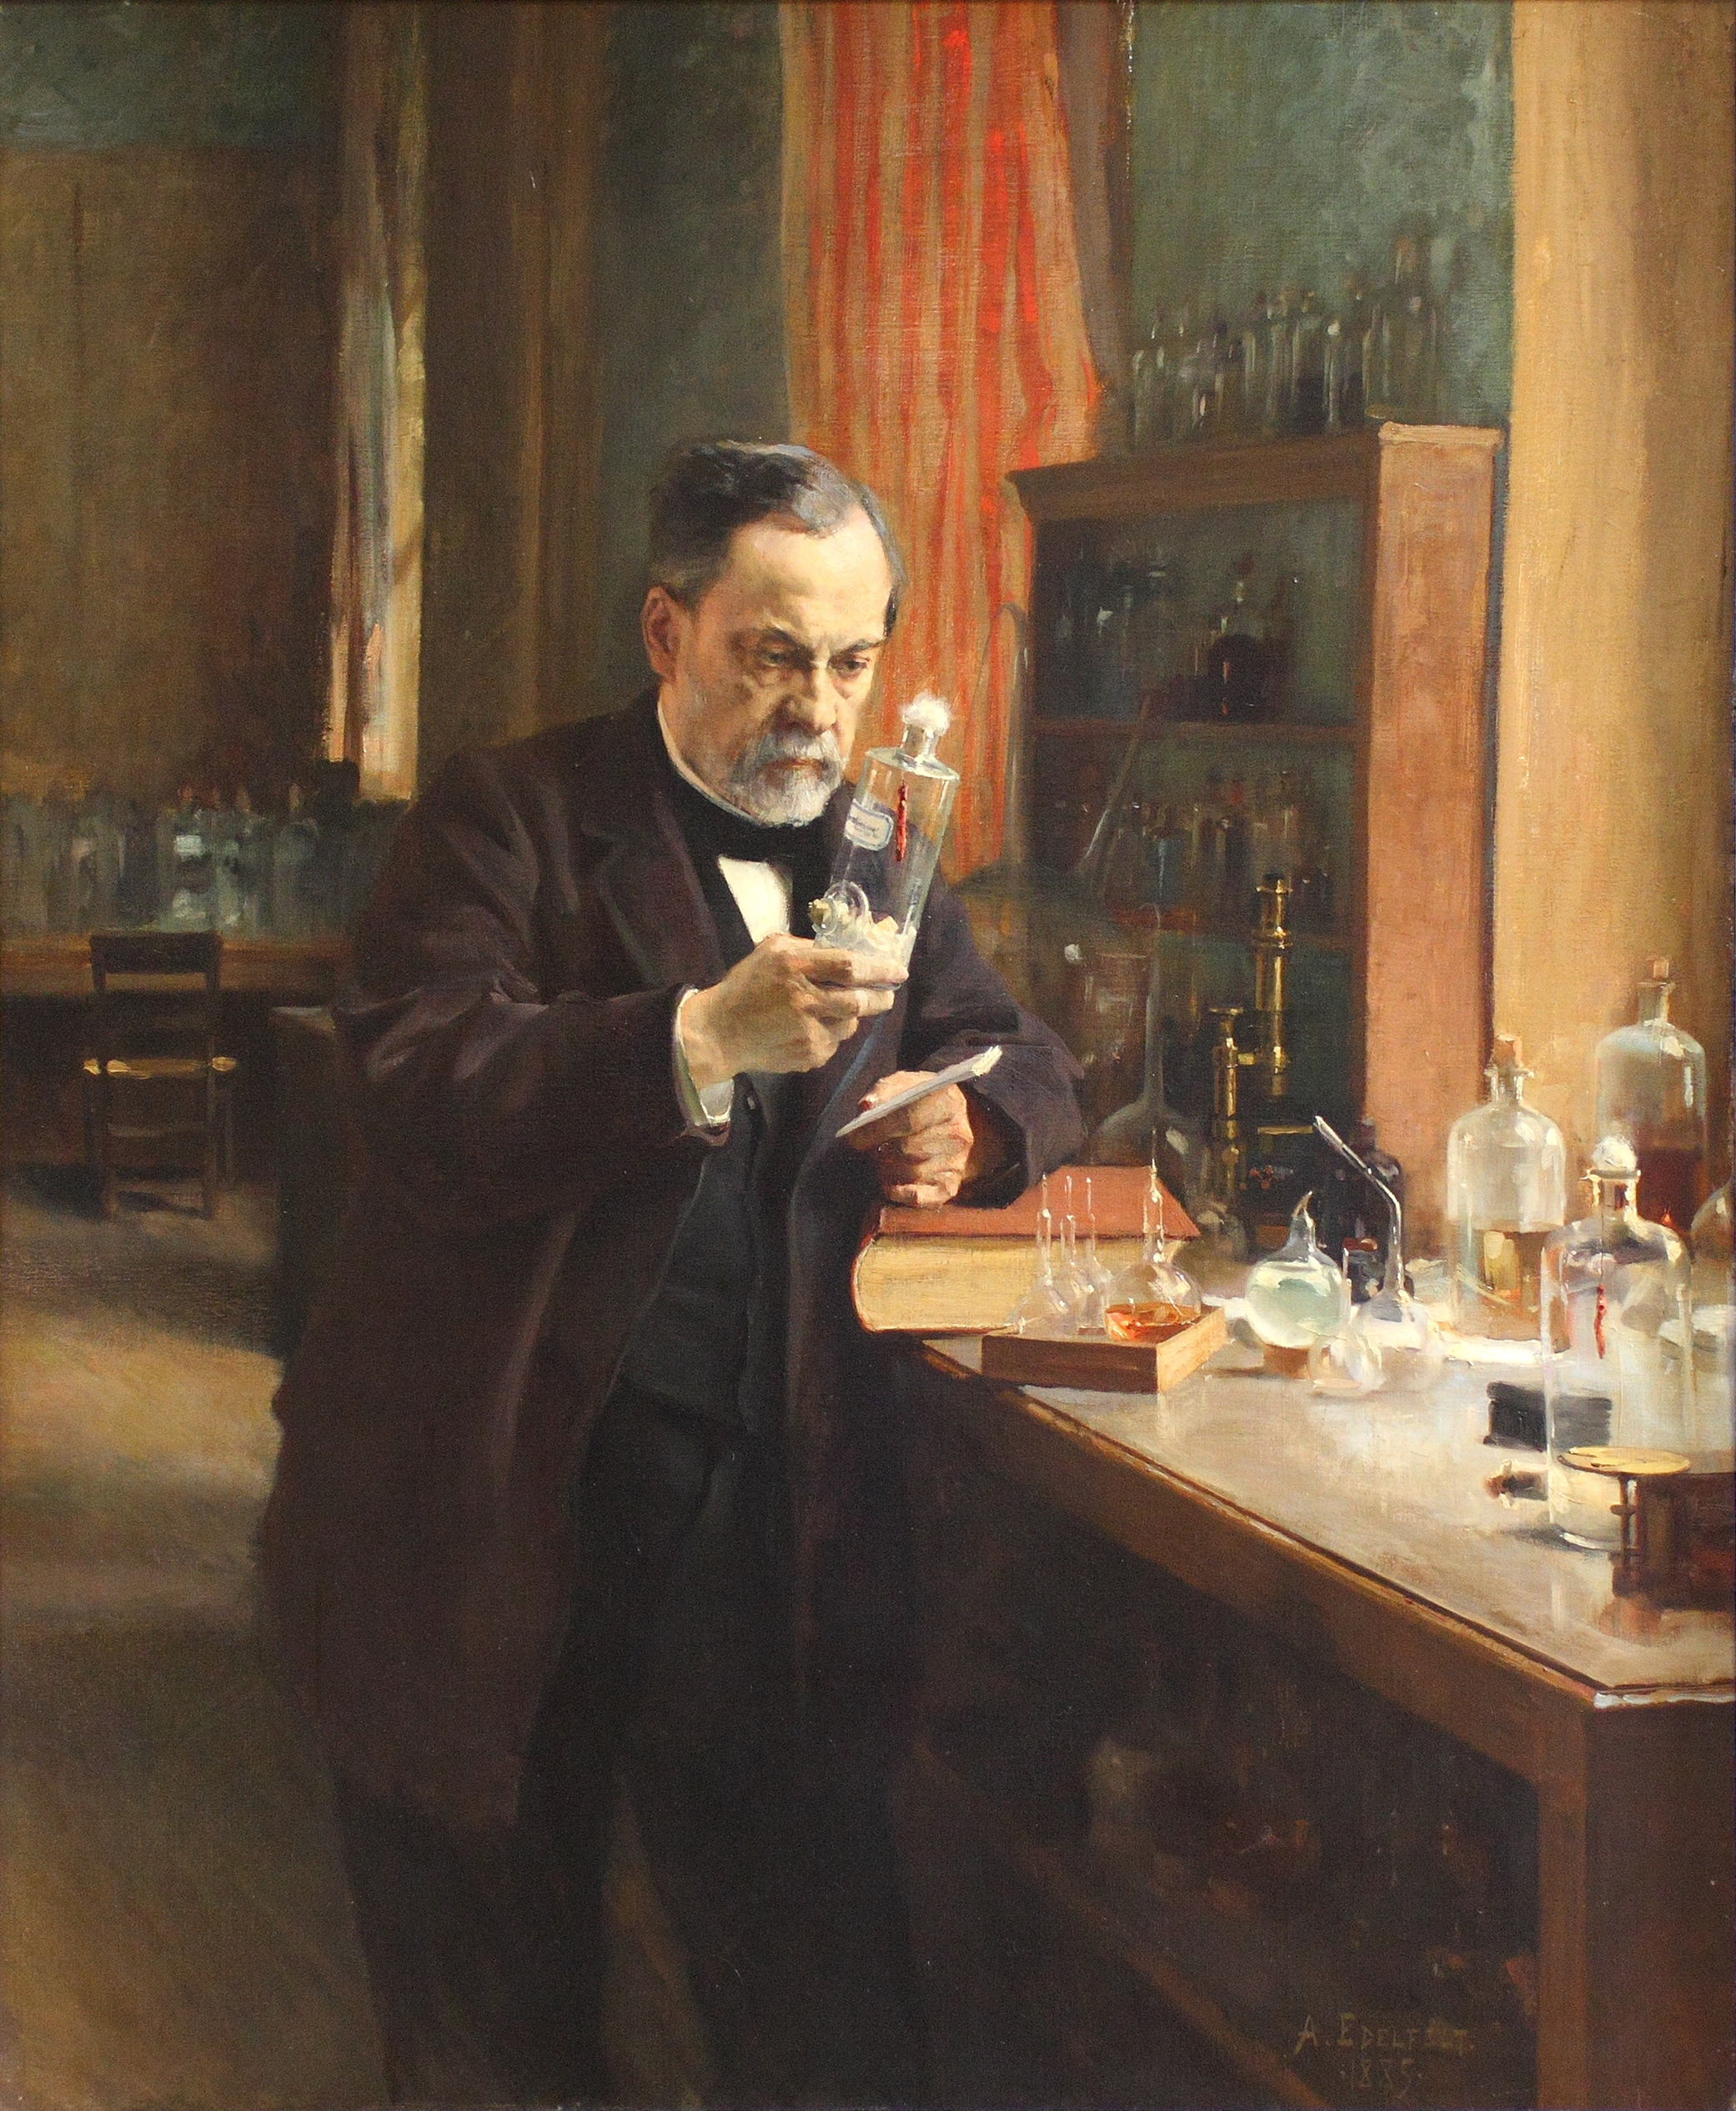 Louis Pasteur in his laboratory, painting by A. Edelfeldt in 1885. 